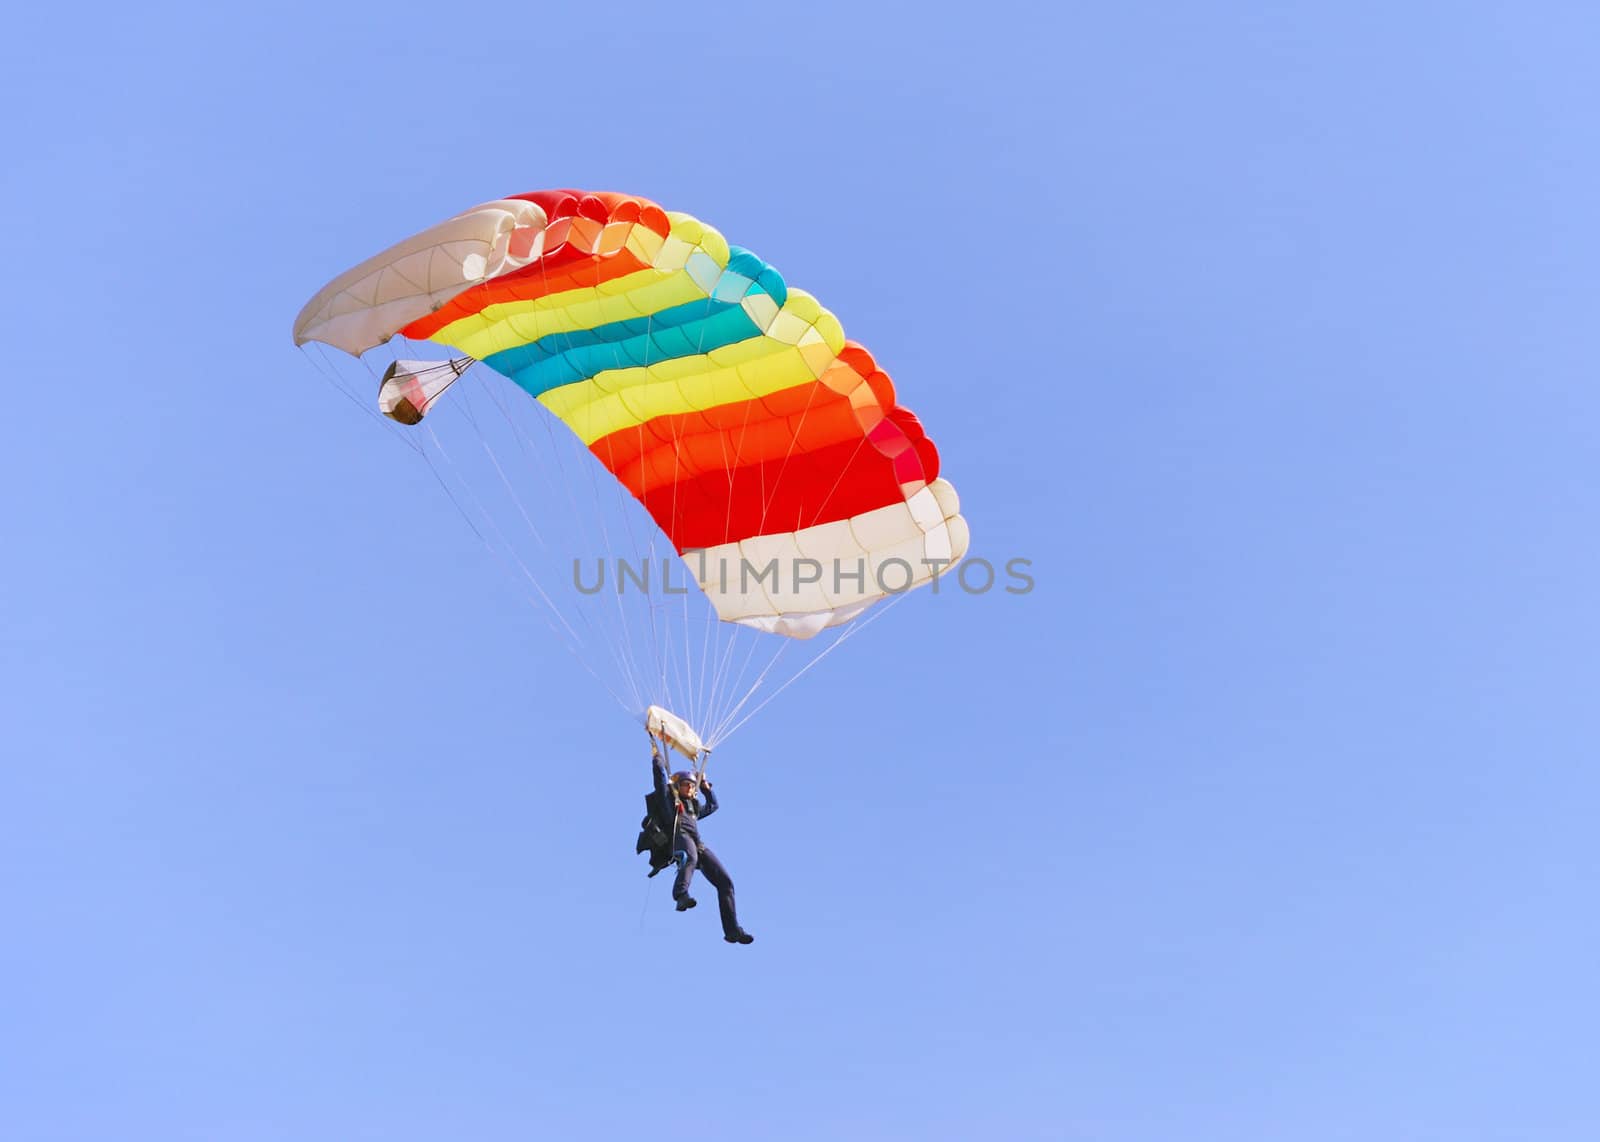 Colorful parachute by whitechild